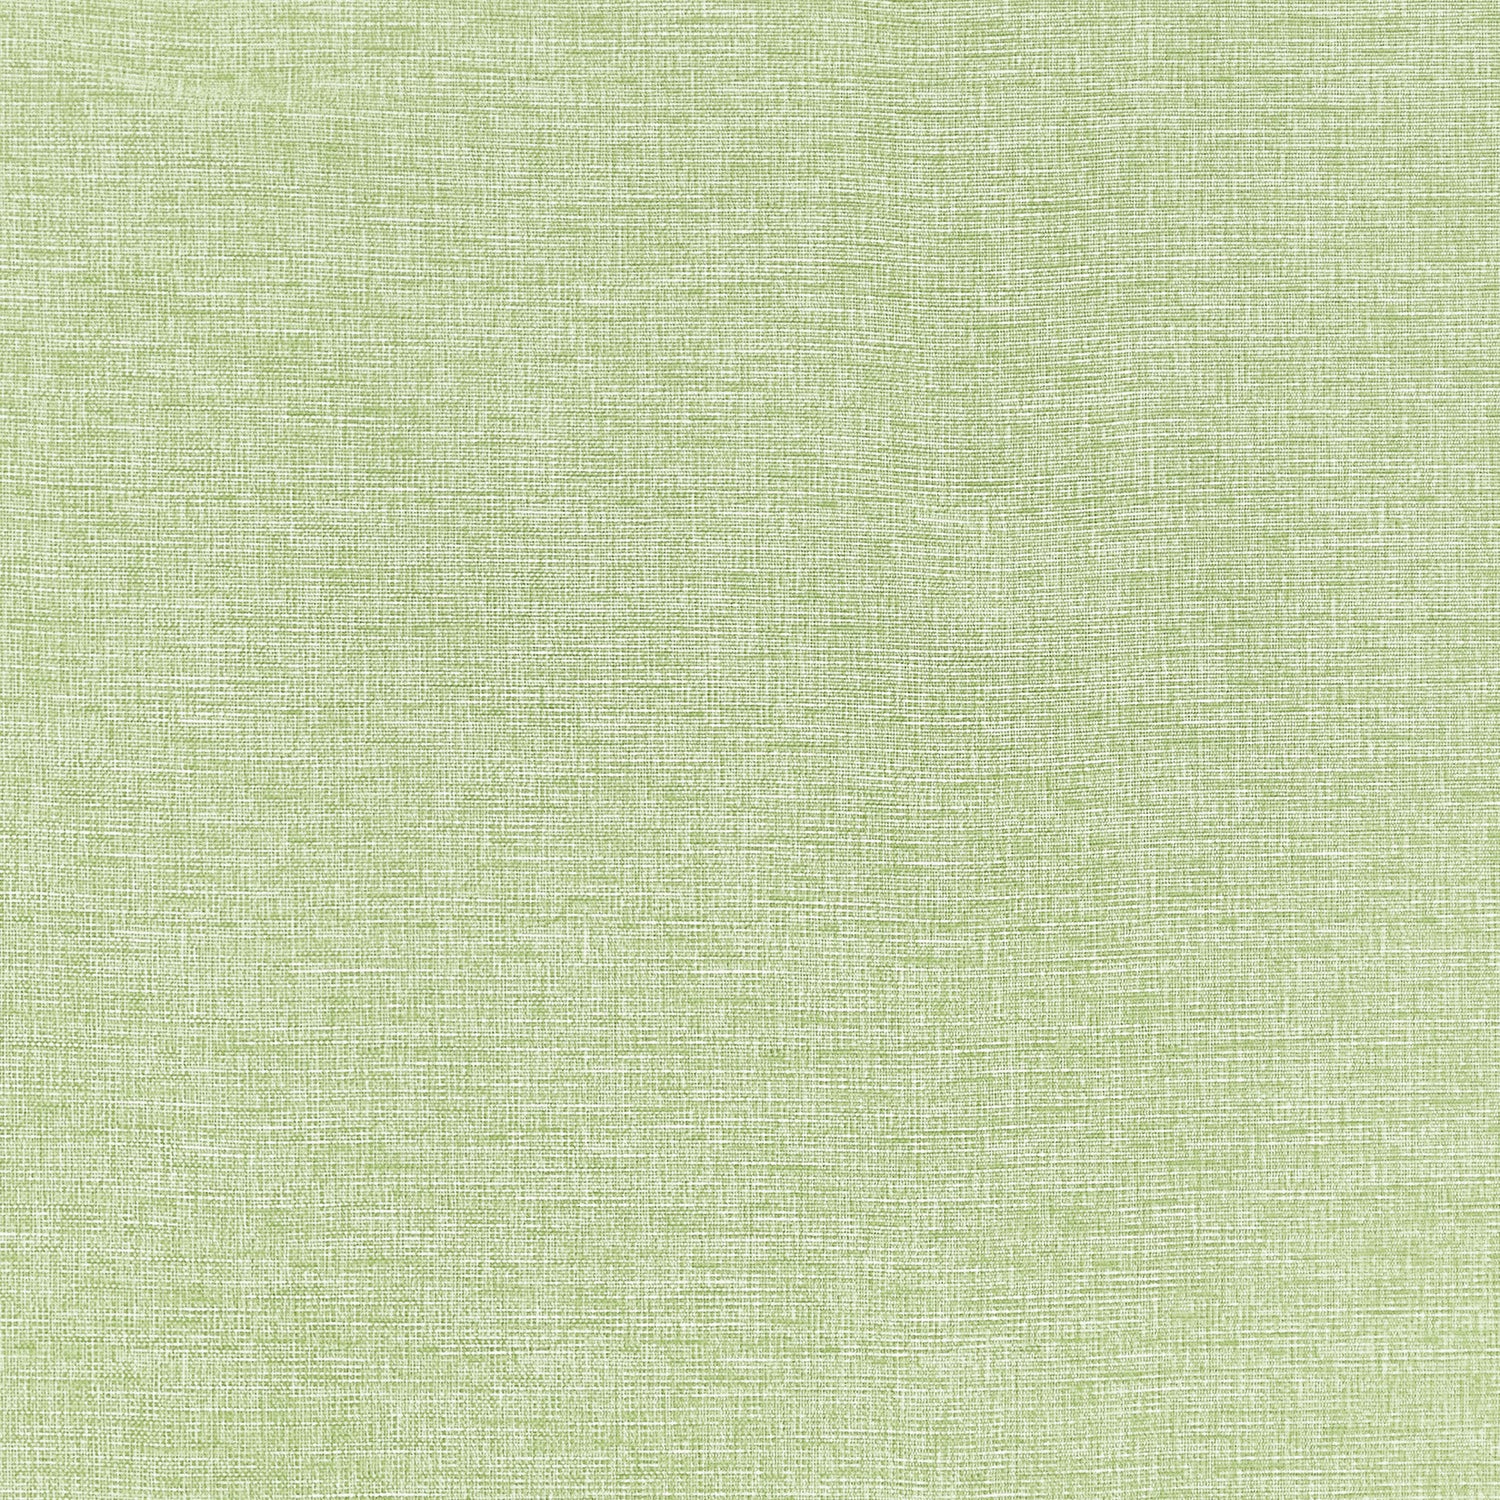 Finley fabric in willow color - pattern number W81609 - by Thibaut in the Locale collection